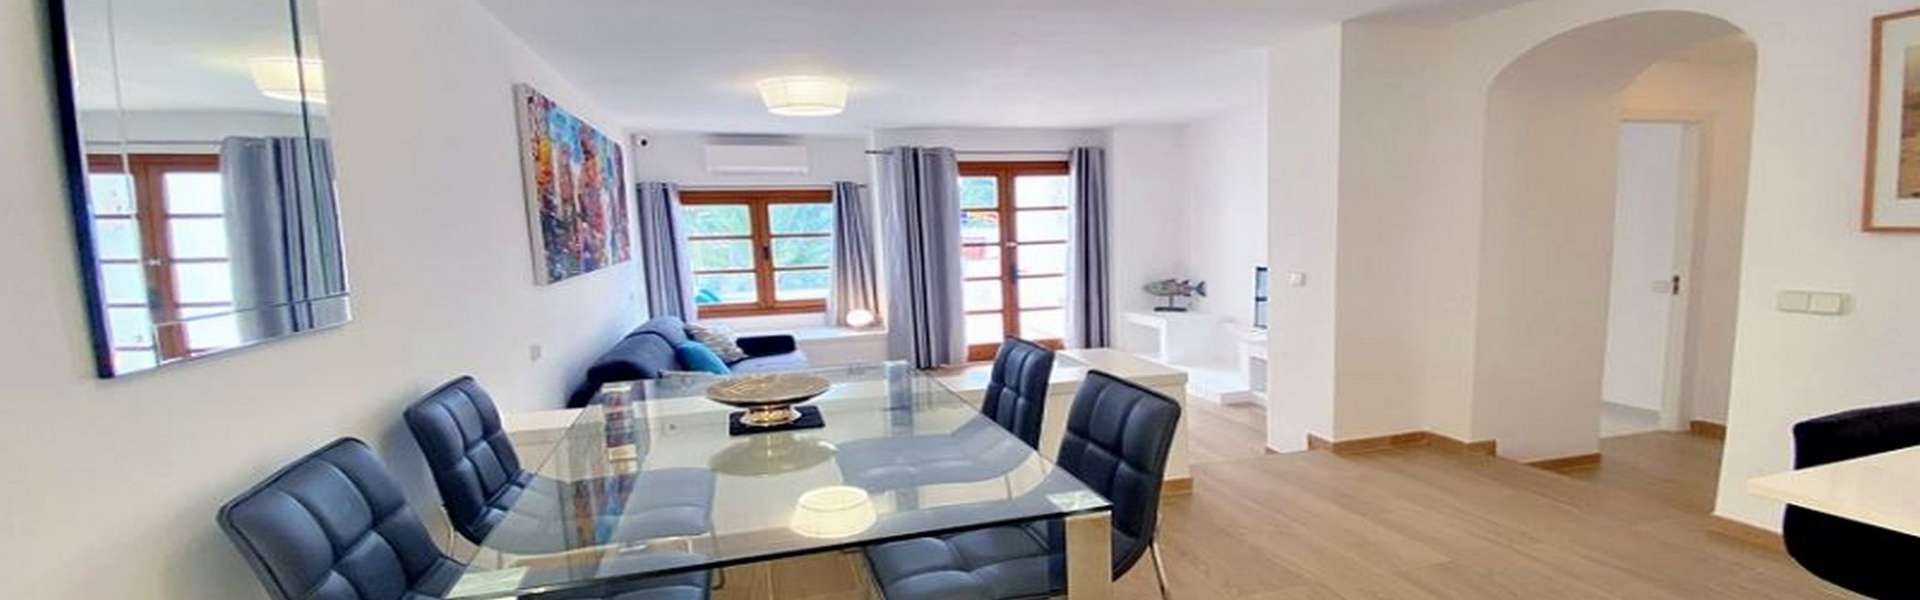 Cala d'Or - Renovated apartment in the marina